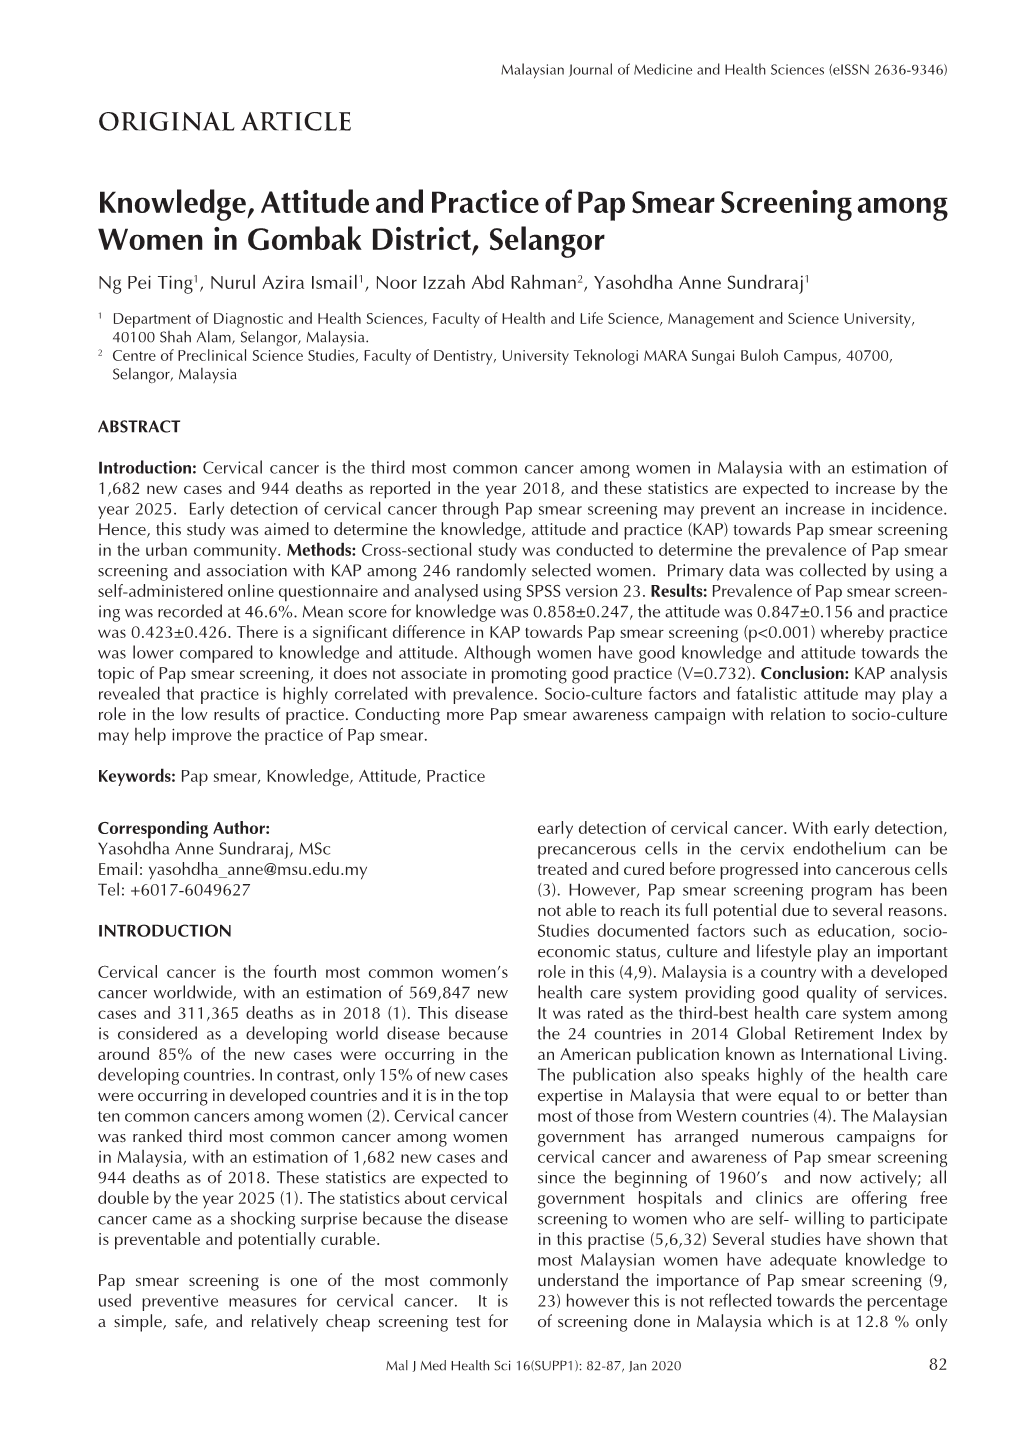 Knowledge, Attitude and Practice of Pap Smear Screening Among